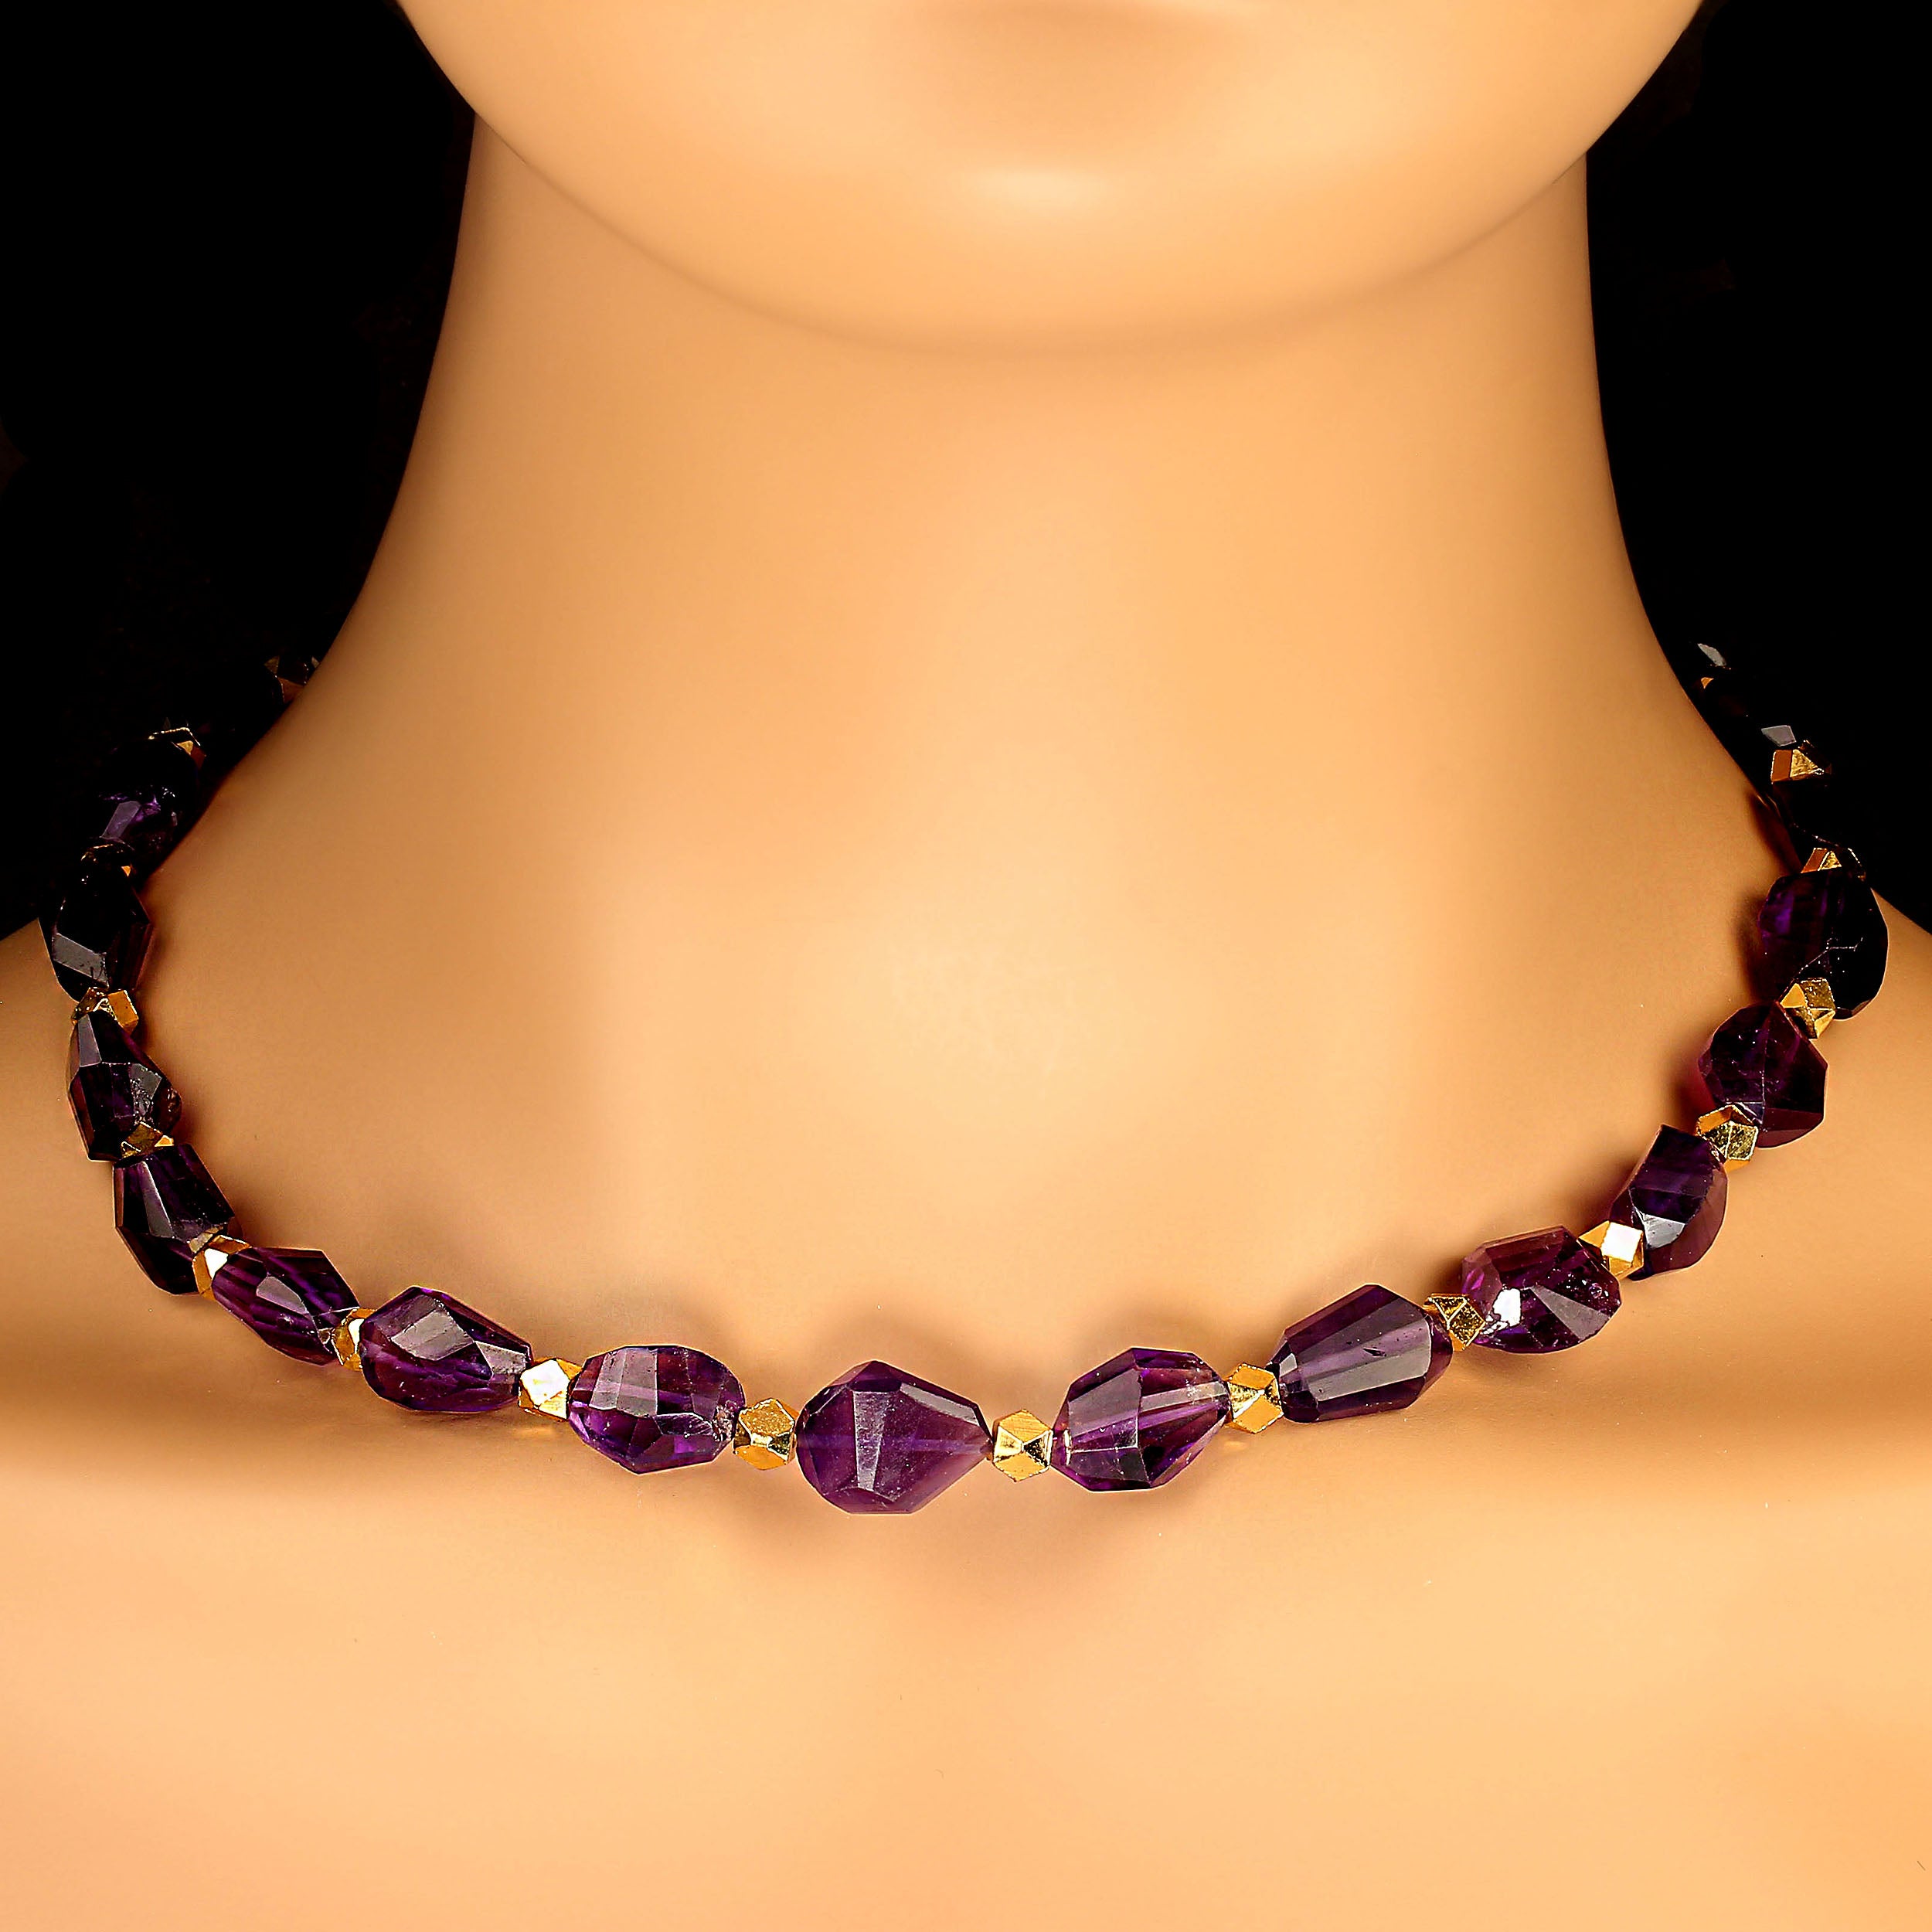 Gorgeous, purple glowing amethyst polished chunks necklace with goldy accents.  Each of these polished chunks is a unique size and shape.  The necklace is secured by a two-ring gold plated toggle clasp. MN2406